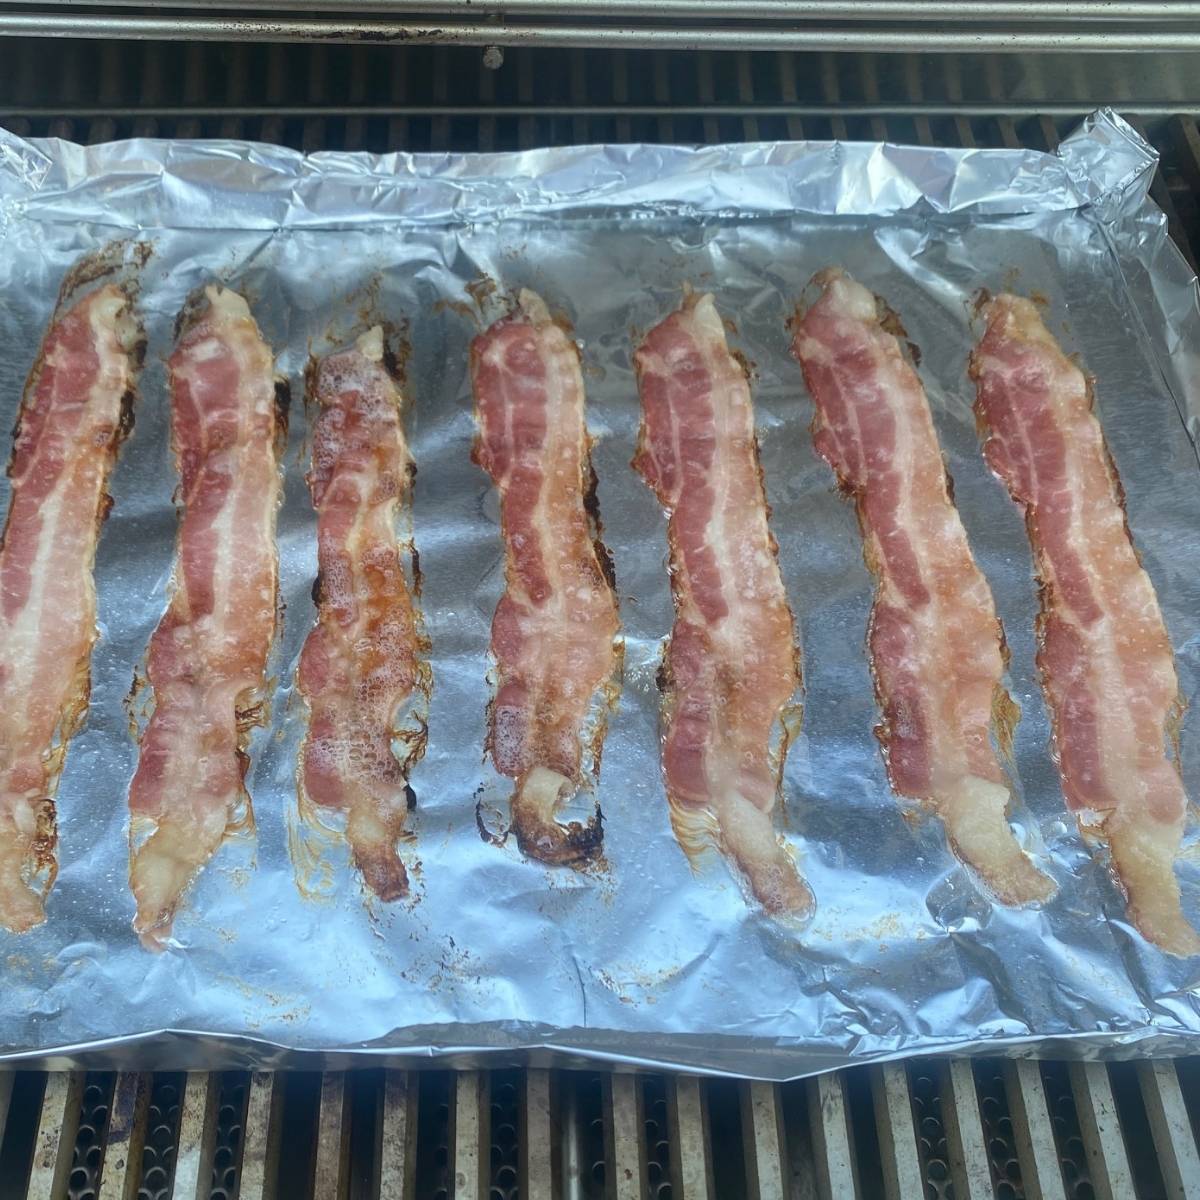 How To Prevent Bacon From Sticking To Your Baking Sheet